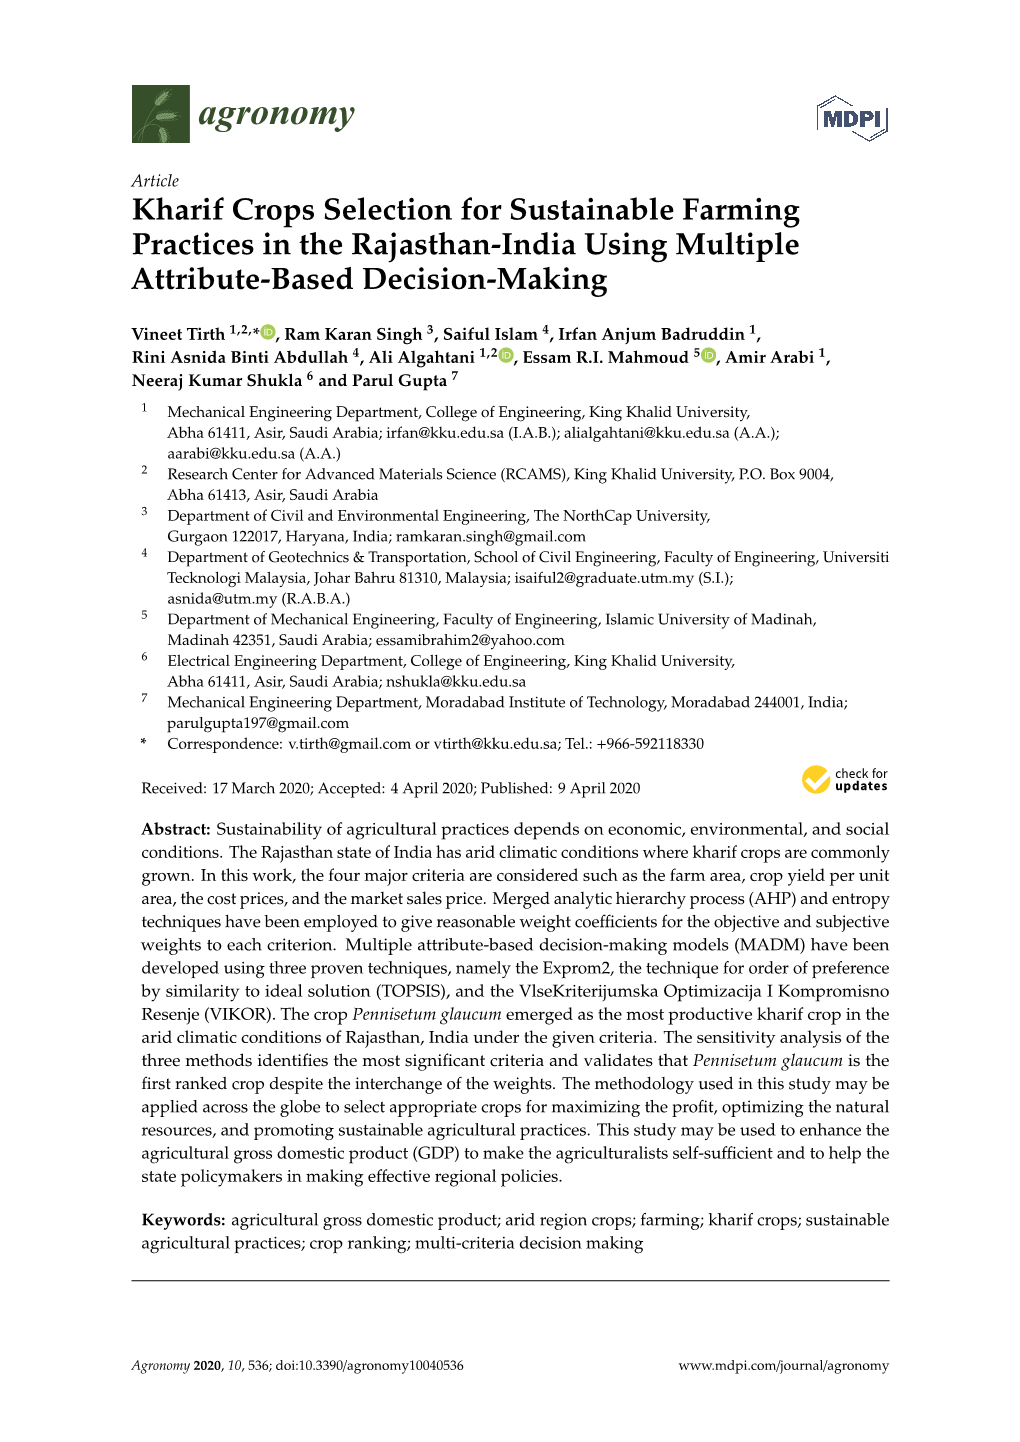 Kharif Crops Selection for Sustainable Farming Practices in the Rajasthan-India Using Multiple Attribute-Based Decision-Making